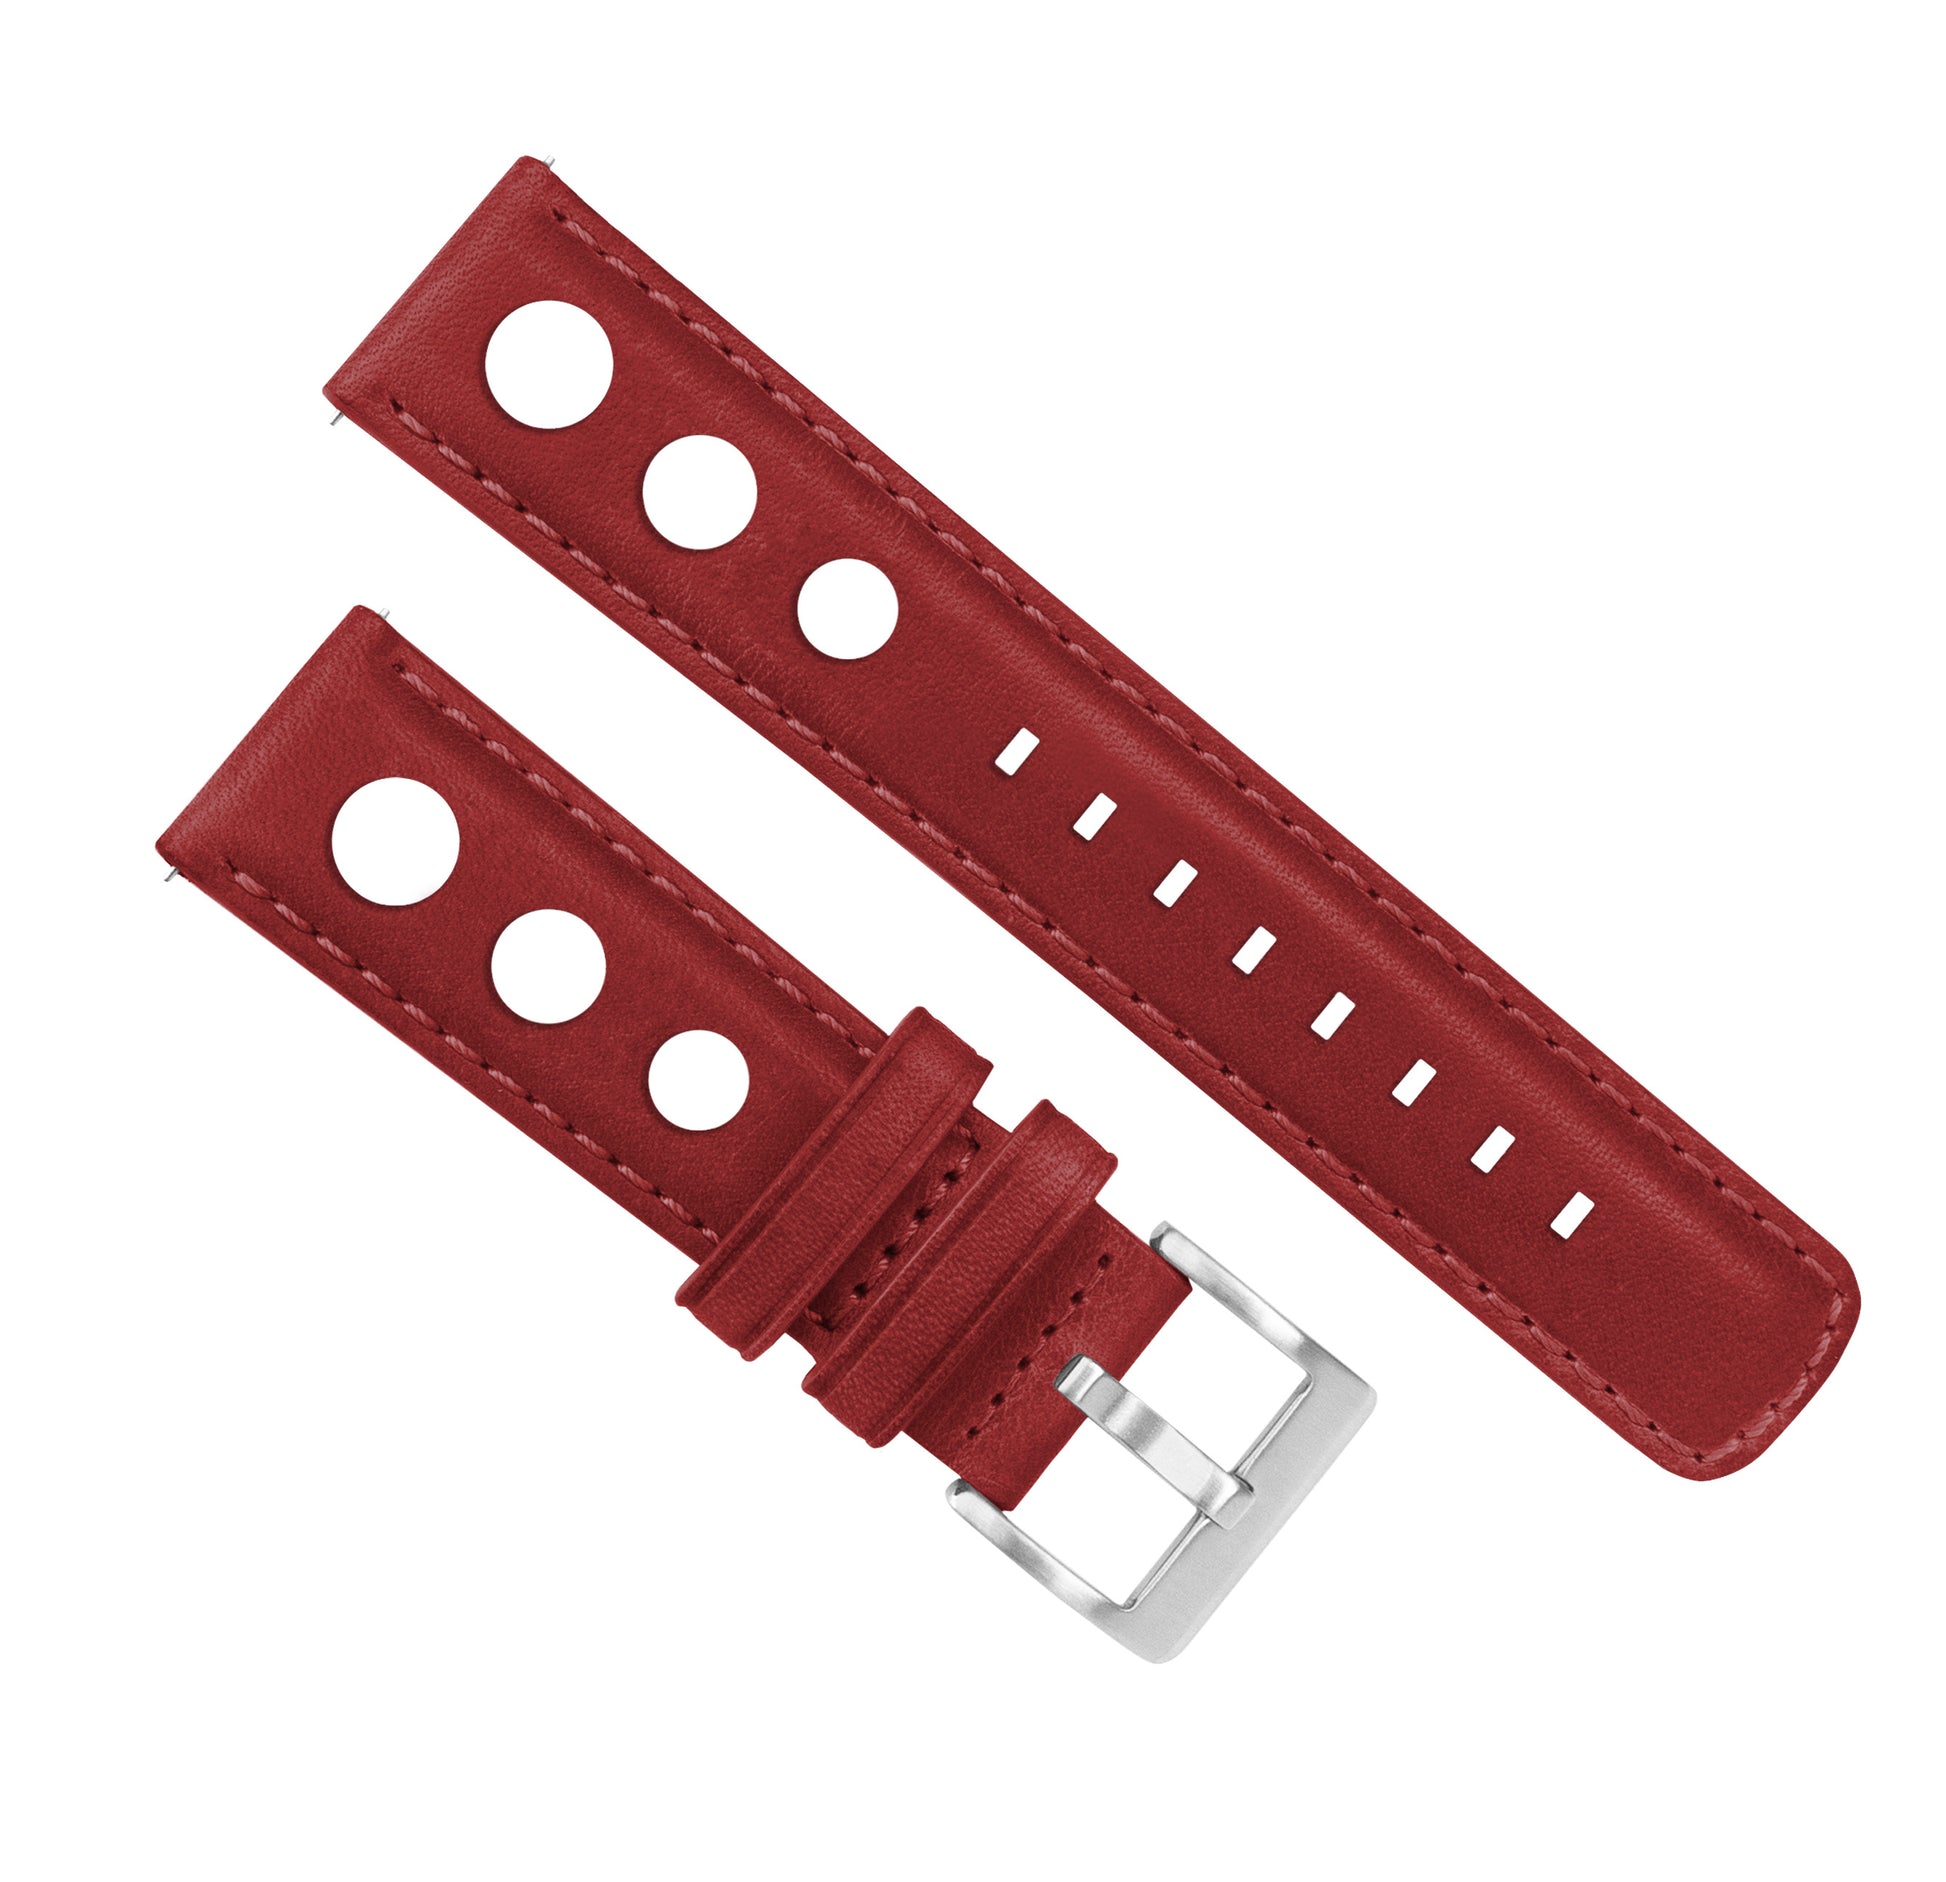 Gear Sport | Rally Horween Leather | Crimson Red - Barton Watch Bands